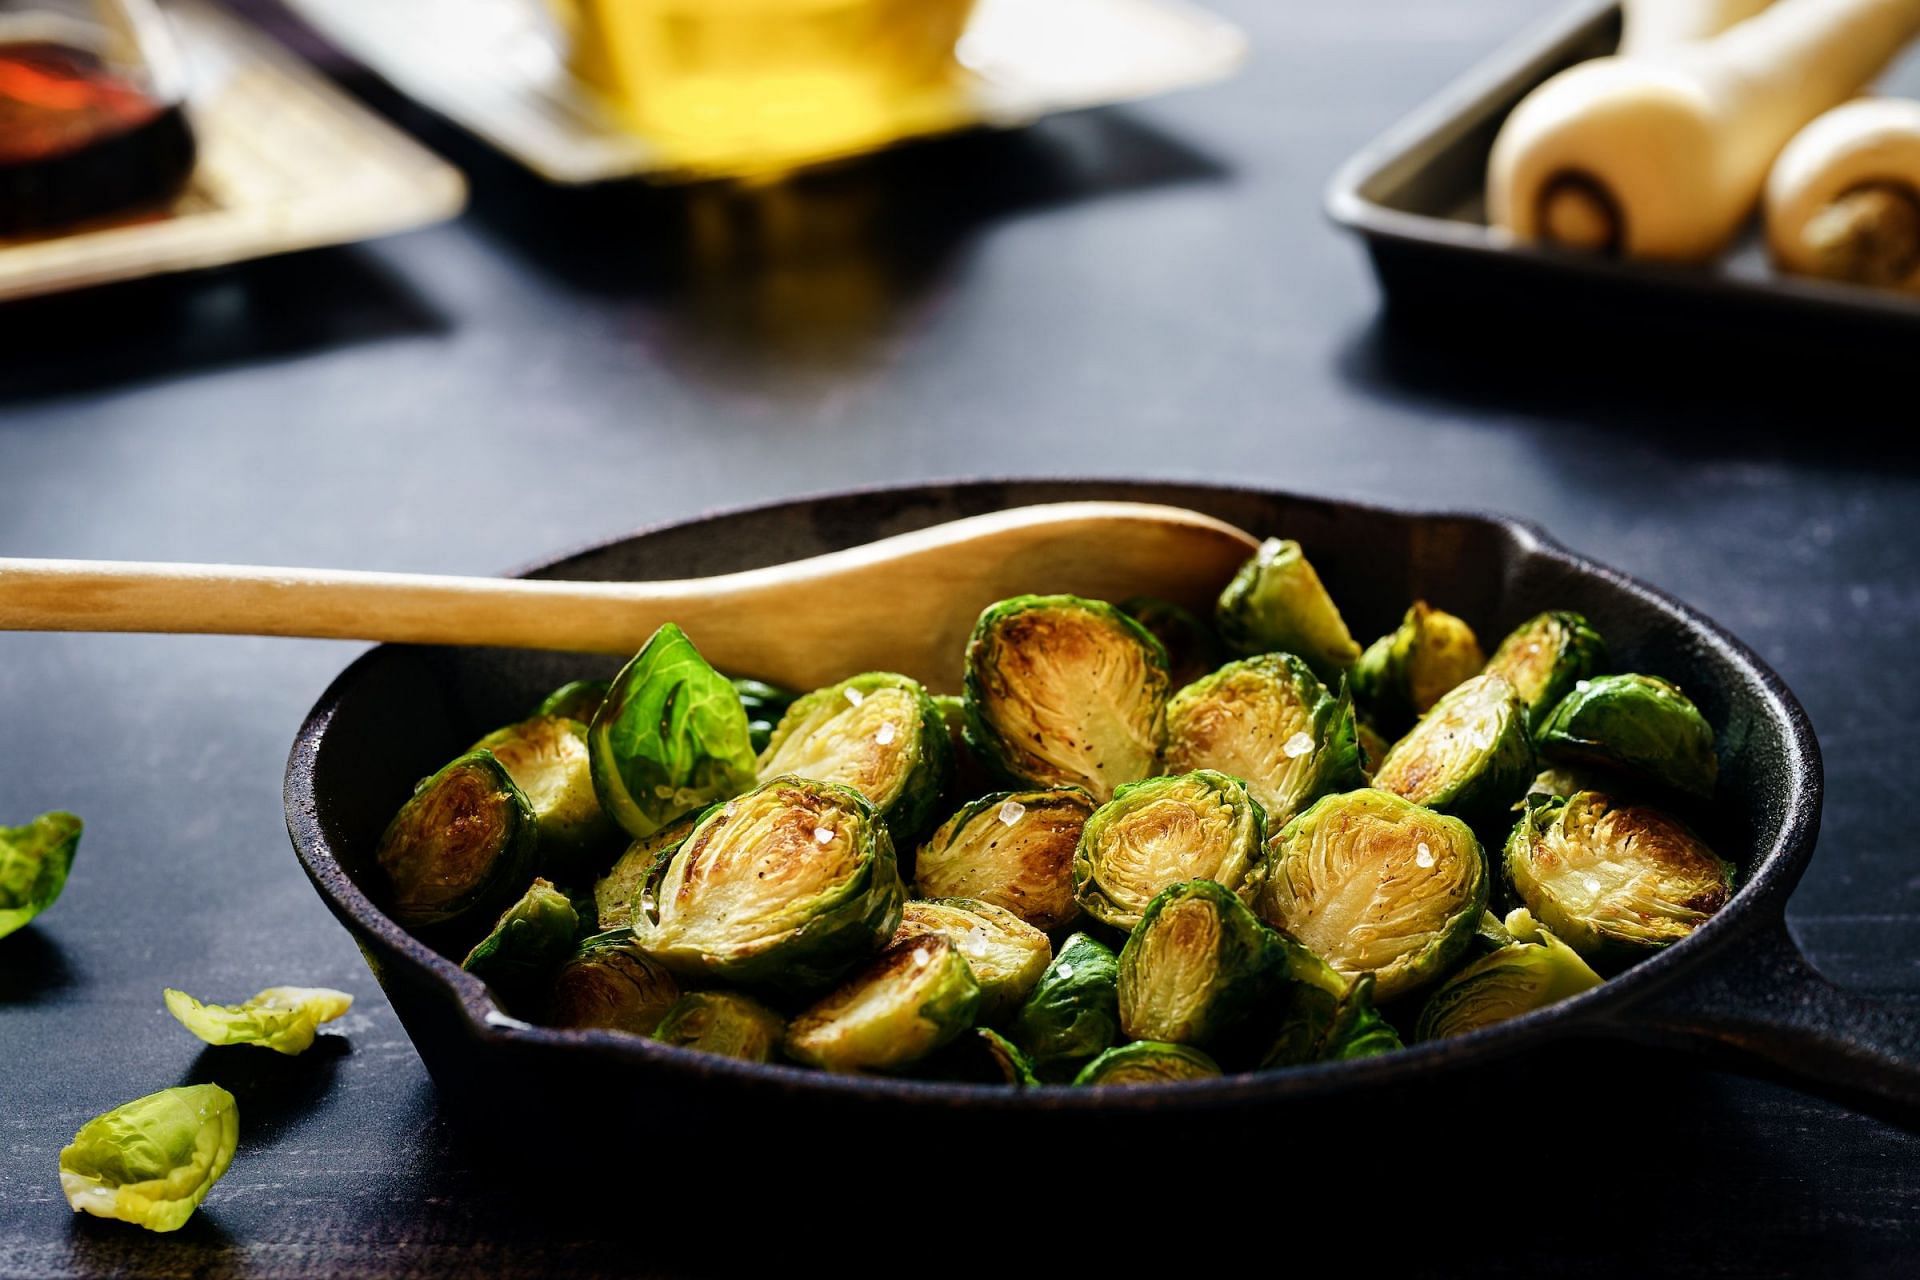 Brussels sprouts are among the food with fiber for breakfast (Image via Unsplash/Sebastian Coman)